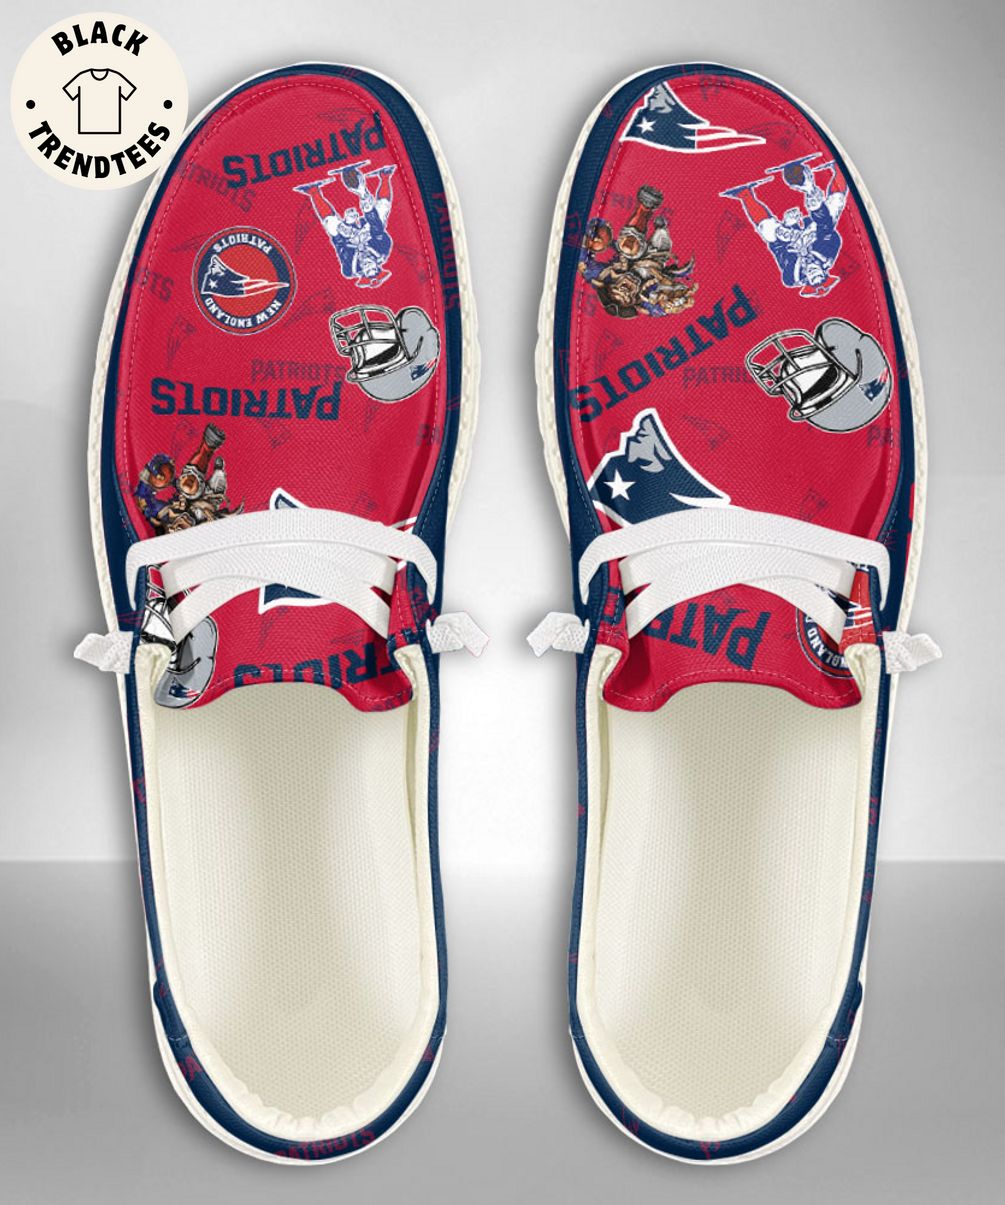 THE BEST NFL New England Patriots Custom Name Hey Dude Shoes